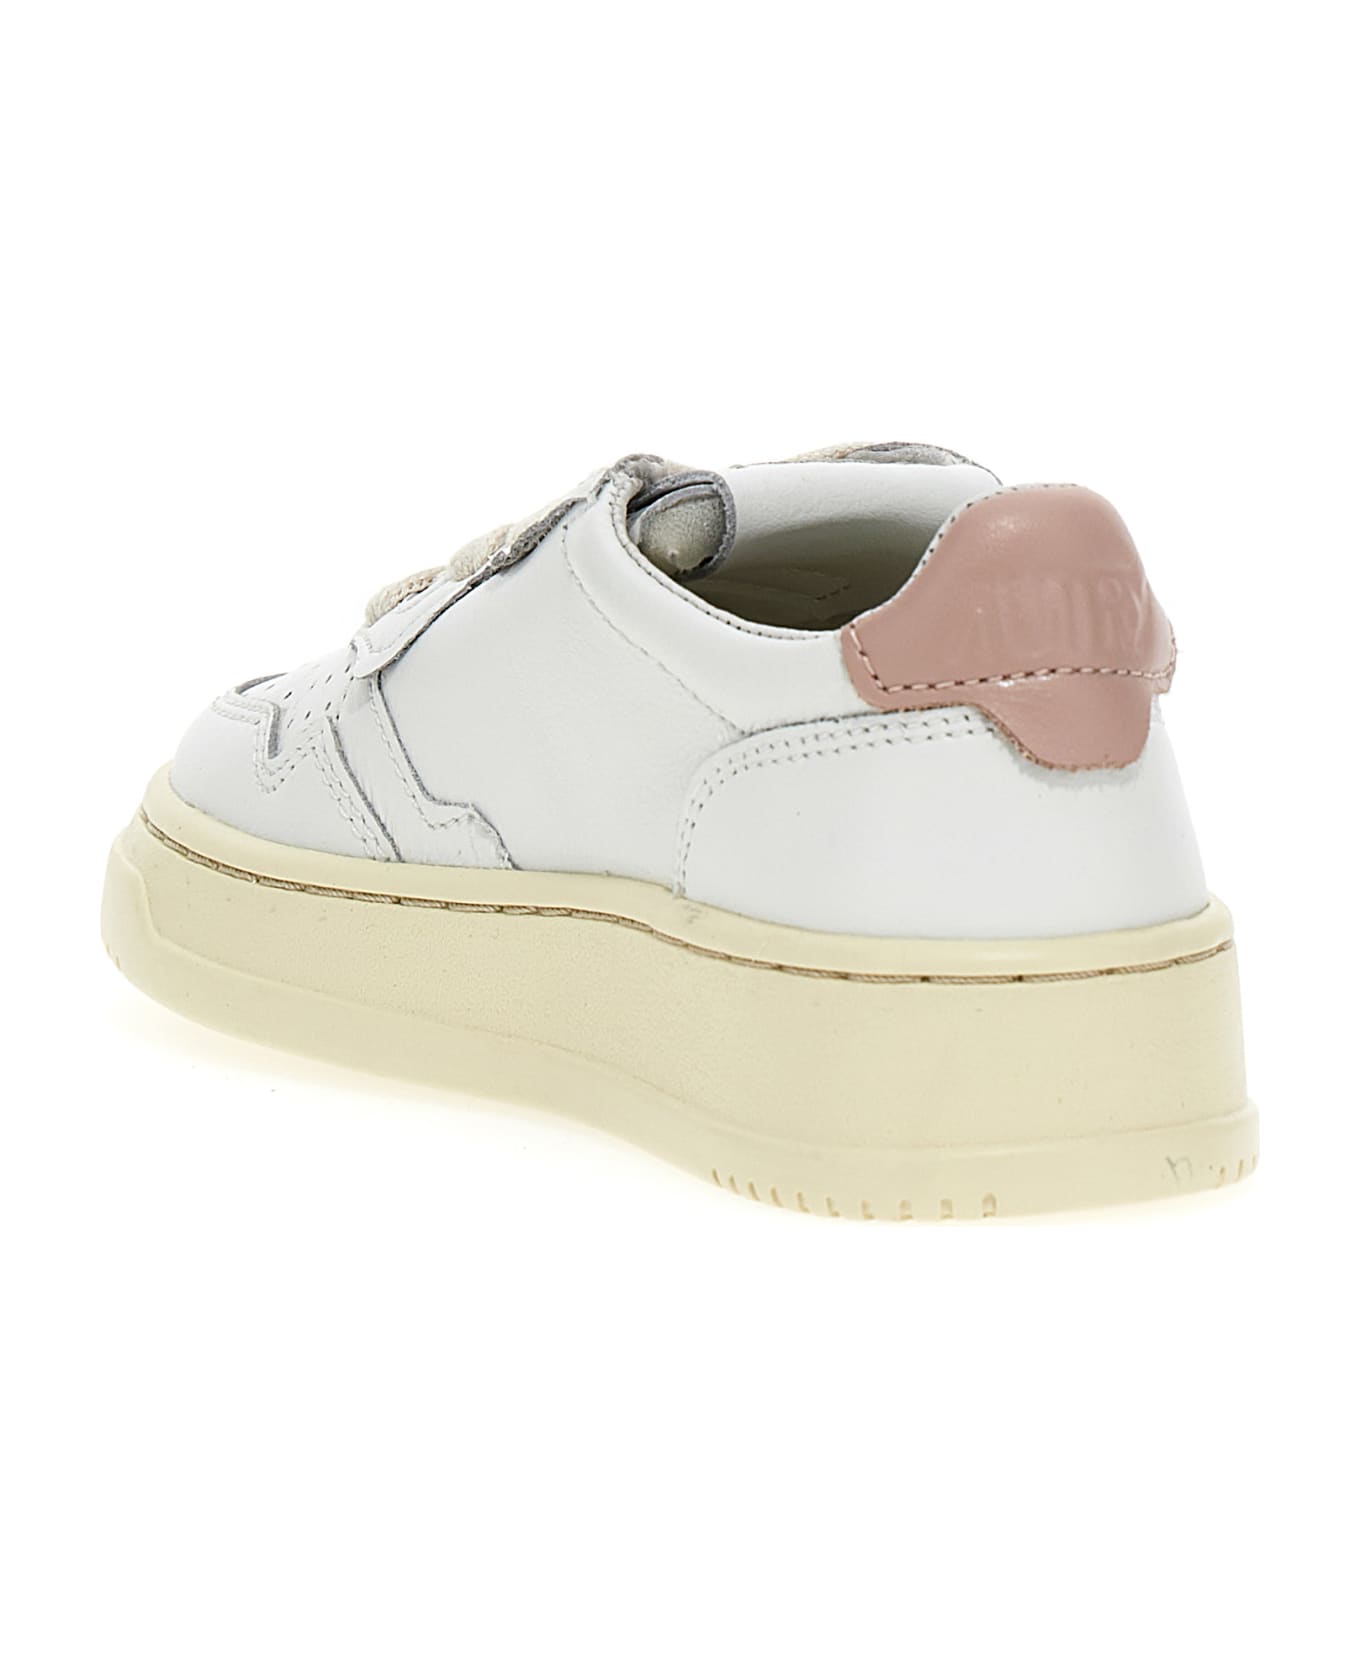 Autry 'autry Kids Low' Sneakers - Bianco